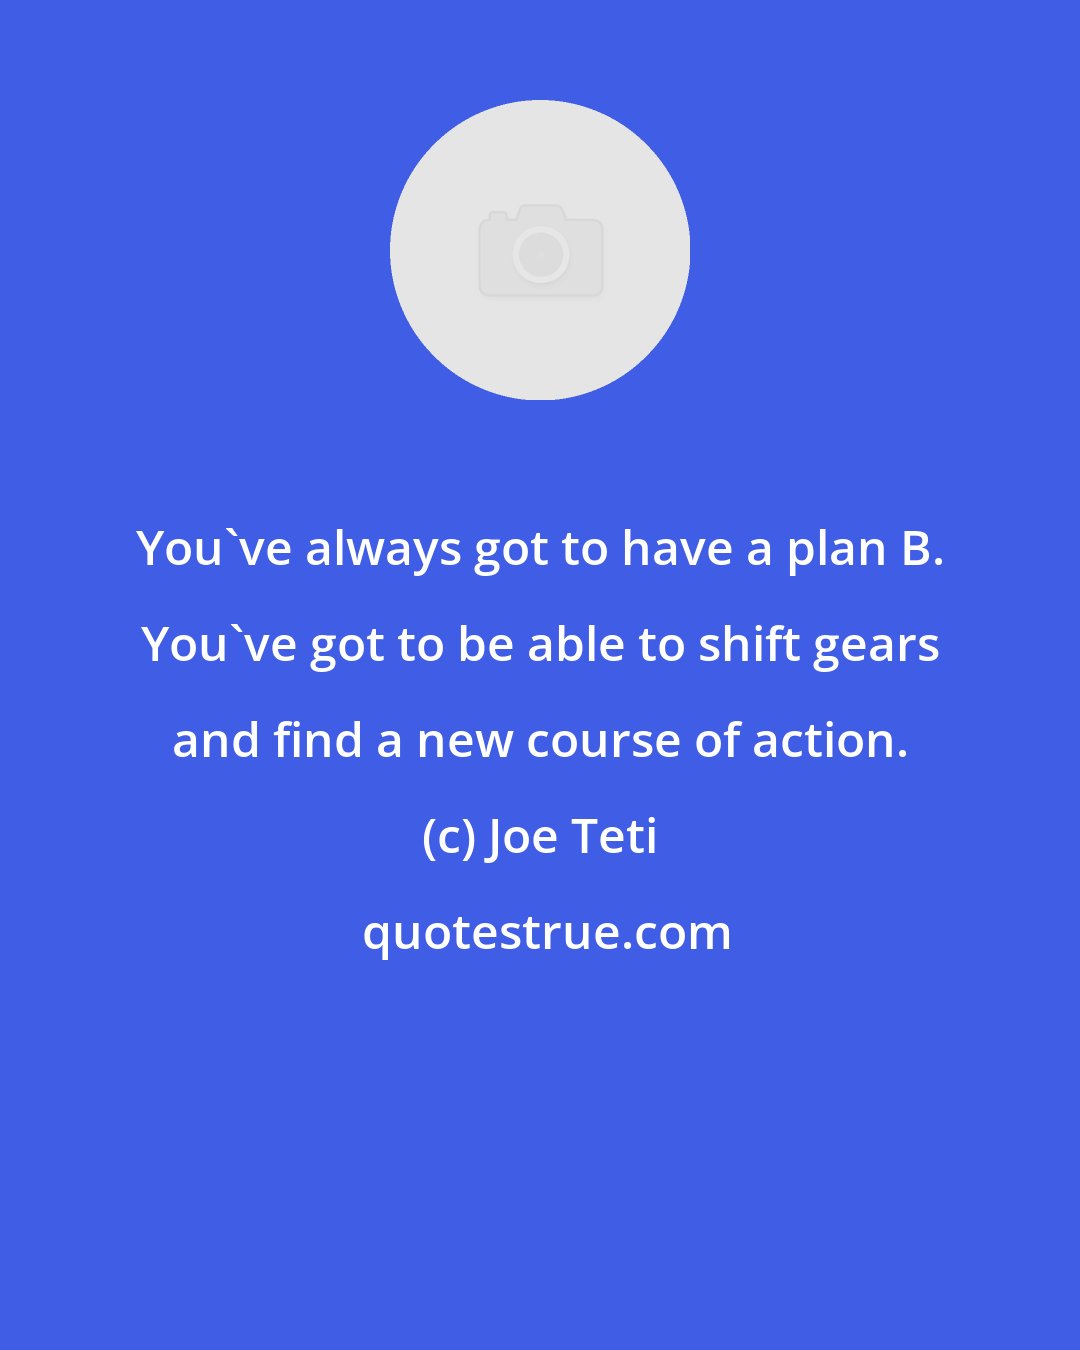 Joe Teti: You've always got to have a plan B. You've got to be able to shift gears and find a new course of action.